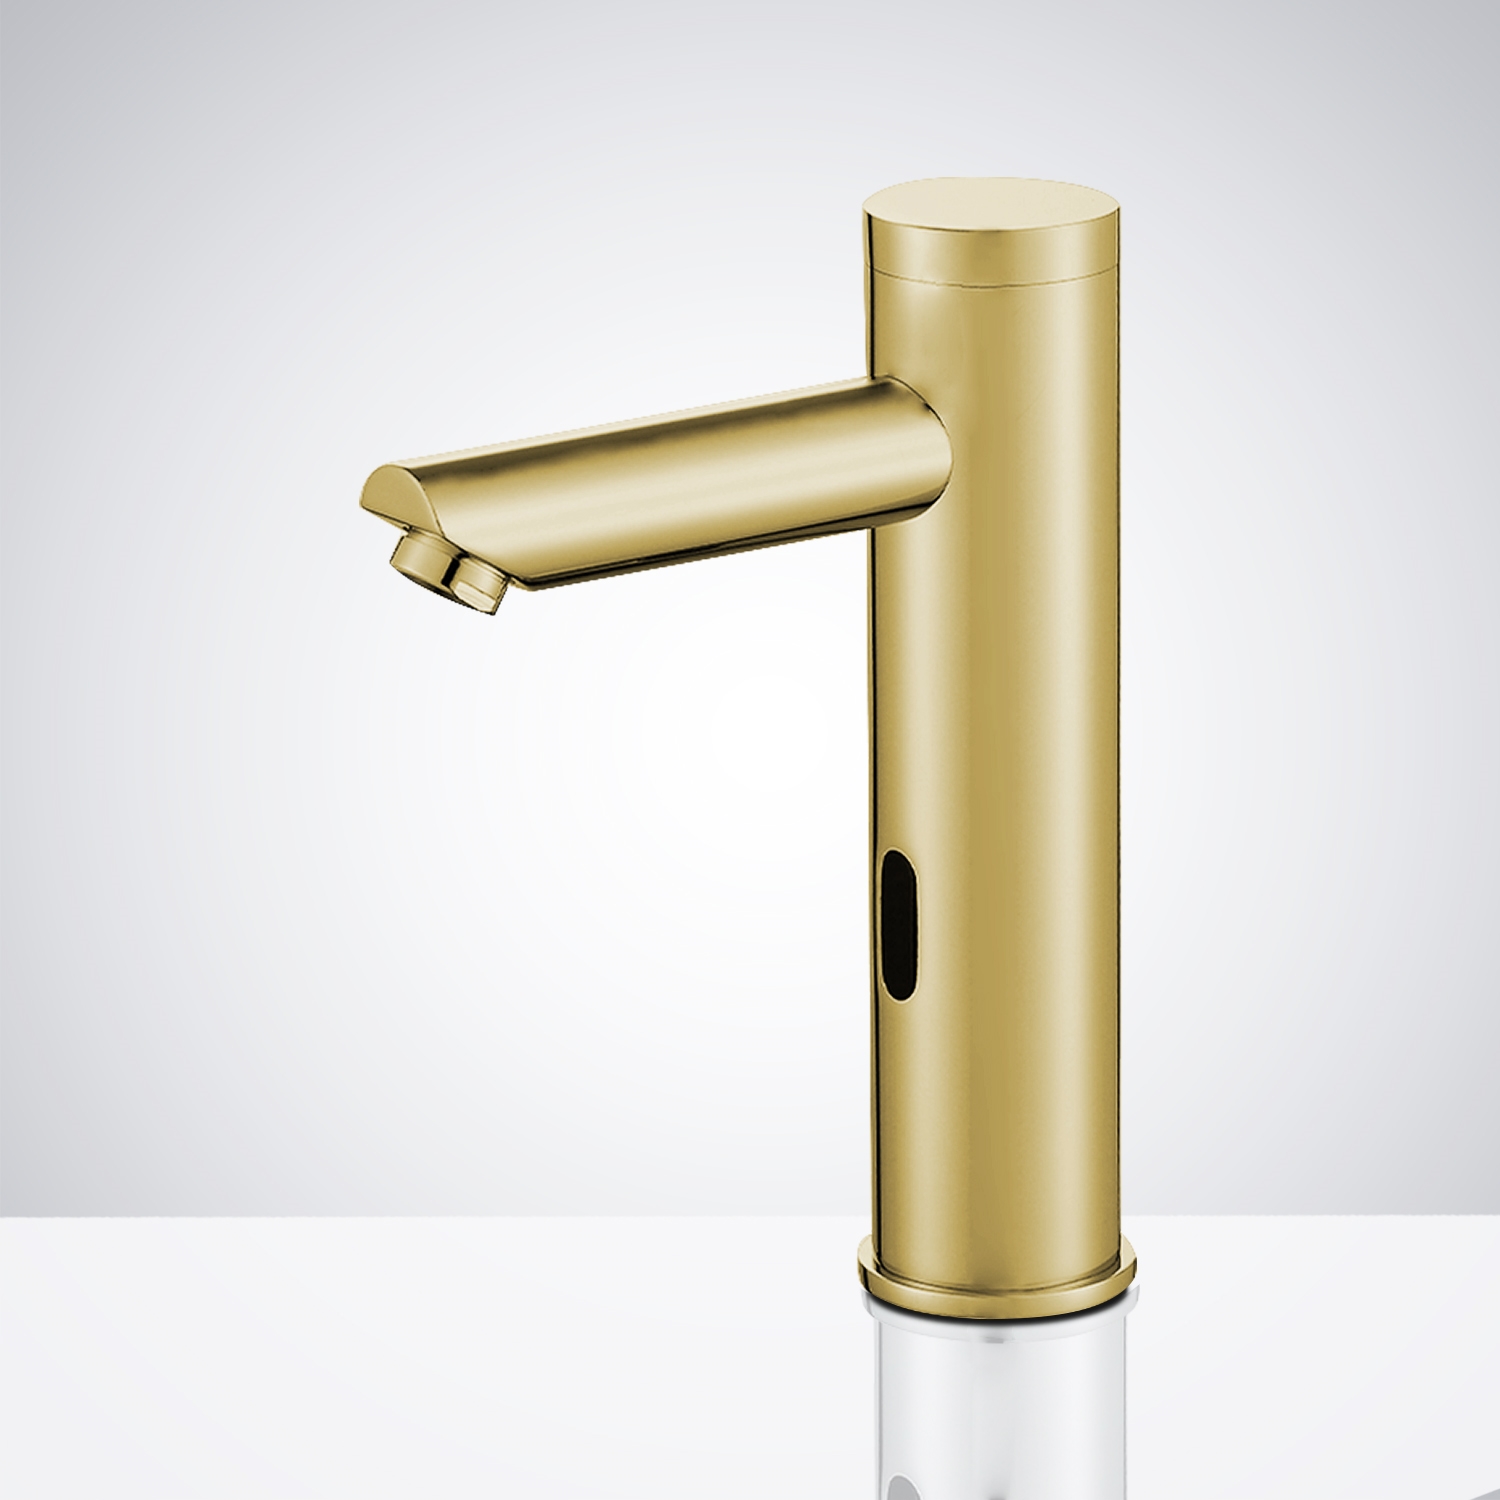 Fontana Commercial Brushed Gold Finish Touchless Automatic Sensor Faucet